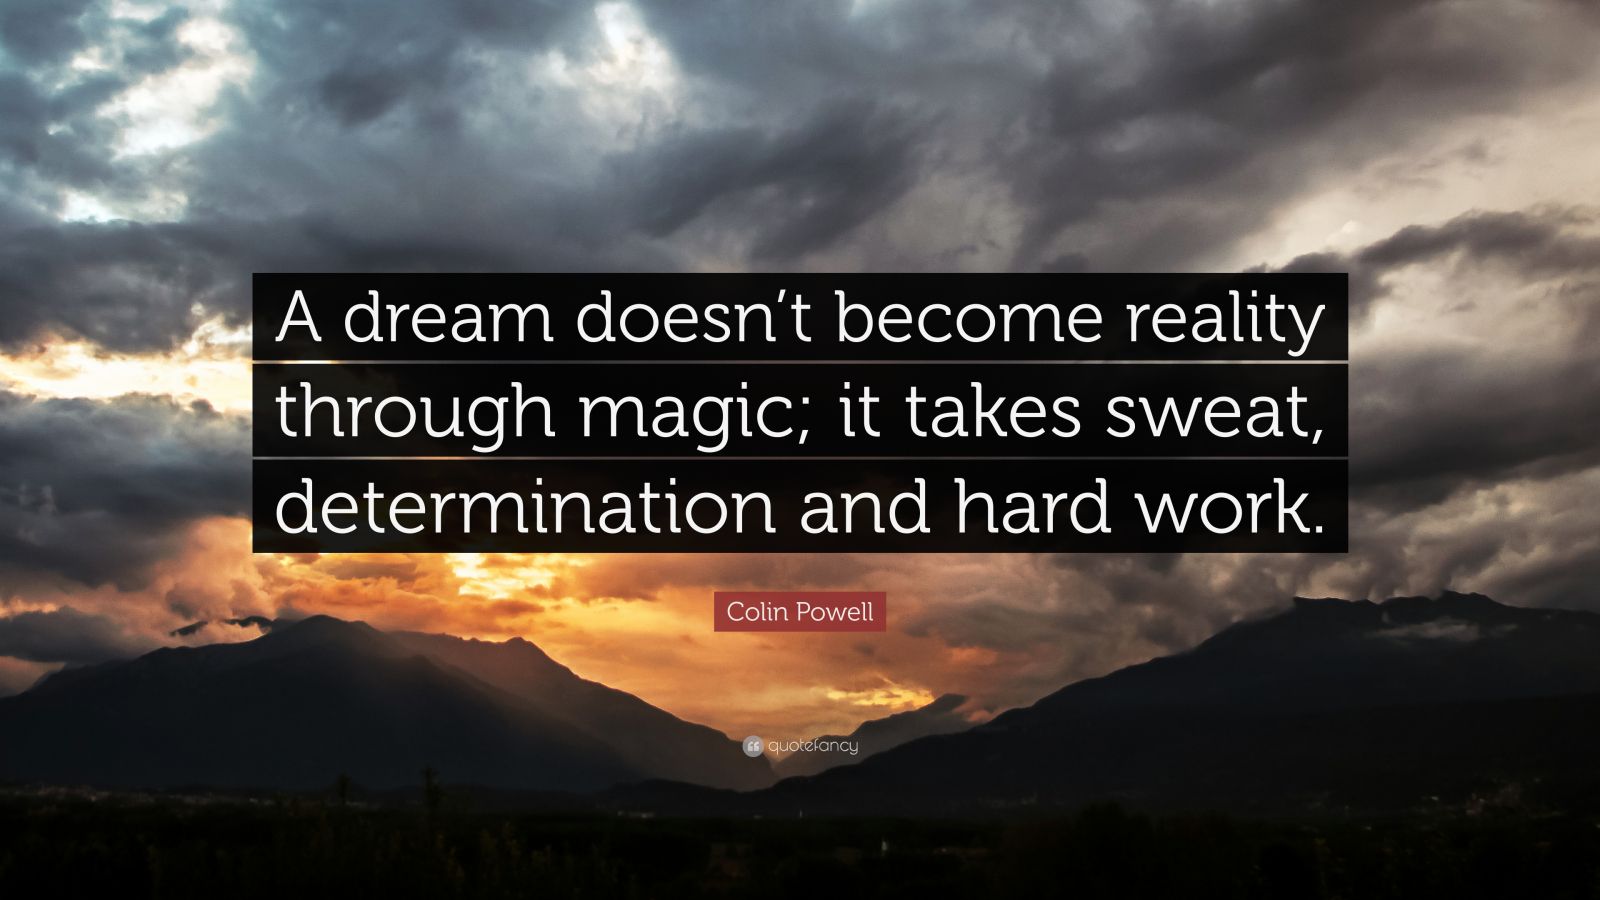 Colin Powell Quote: “A dream doesn’t become reality through magic; it